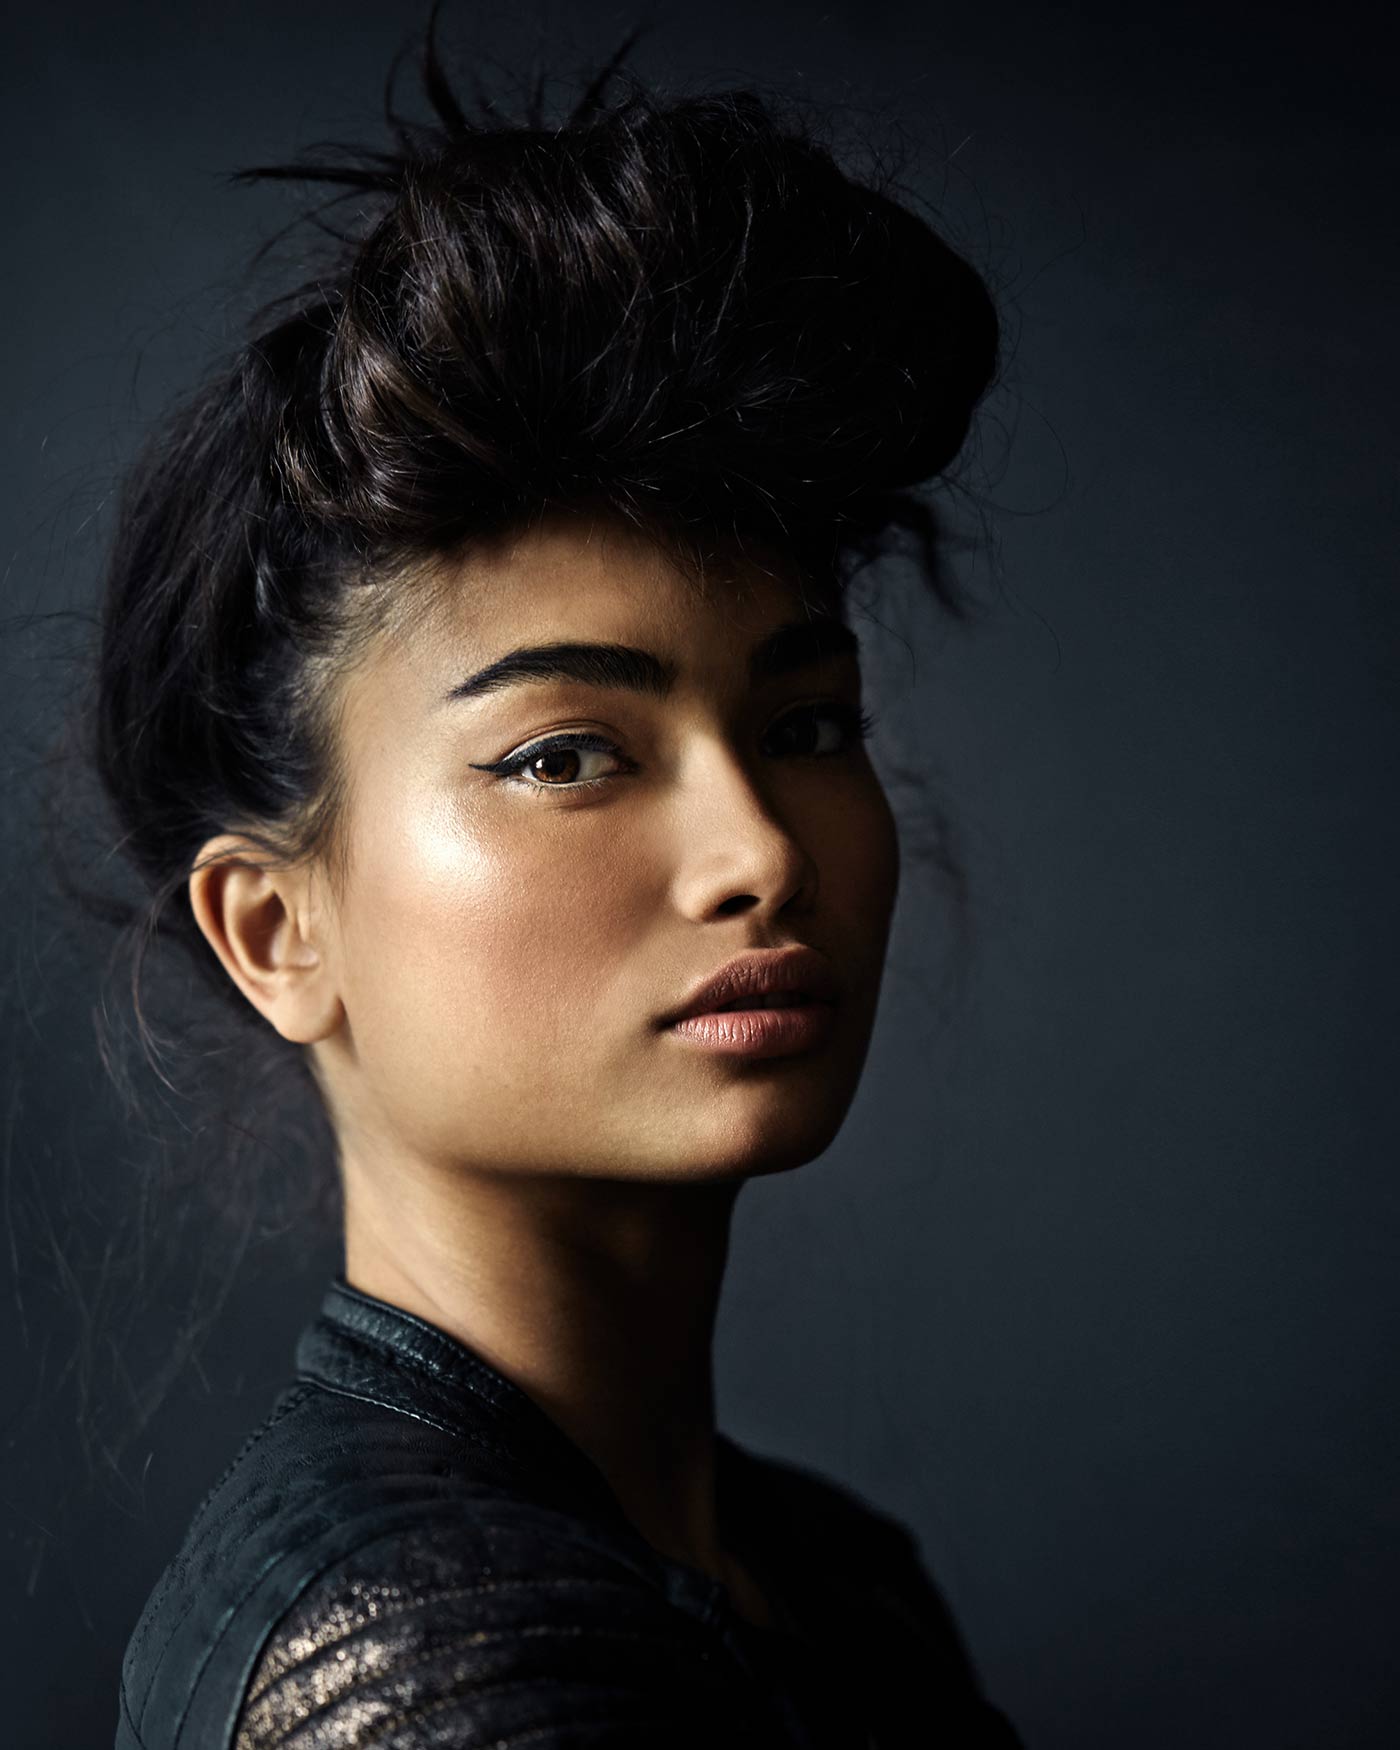 Beauty shot of model showing hair and makeup.